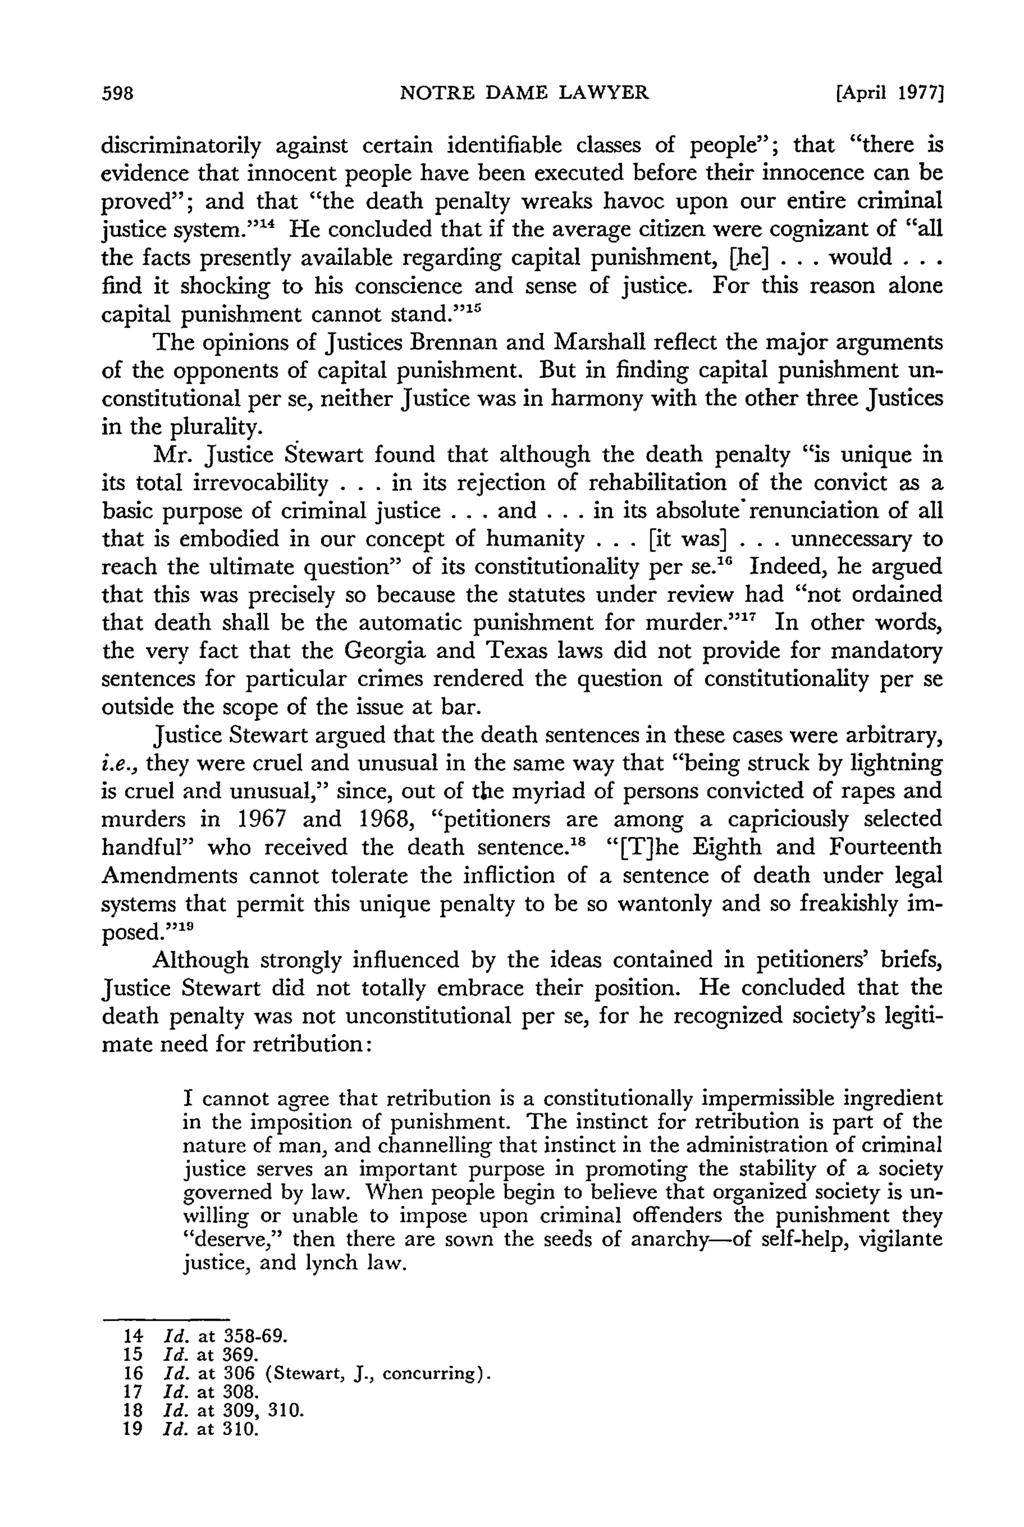 NOTRE DAME LAWYER [April 1977] discriminatorily against certain identifiable classes of people"; that "there is evidence that innocent people have been executed before their innocence can be proved";